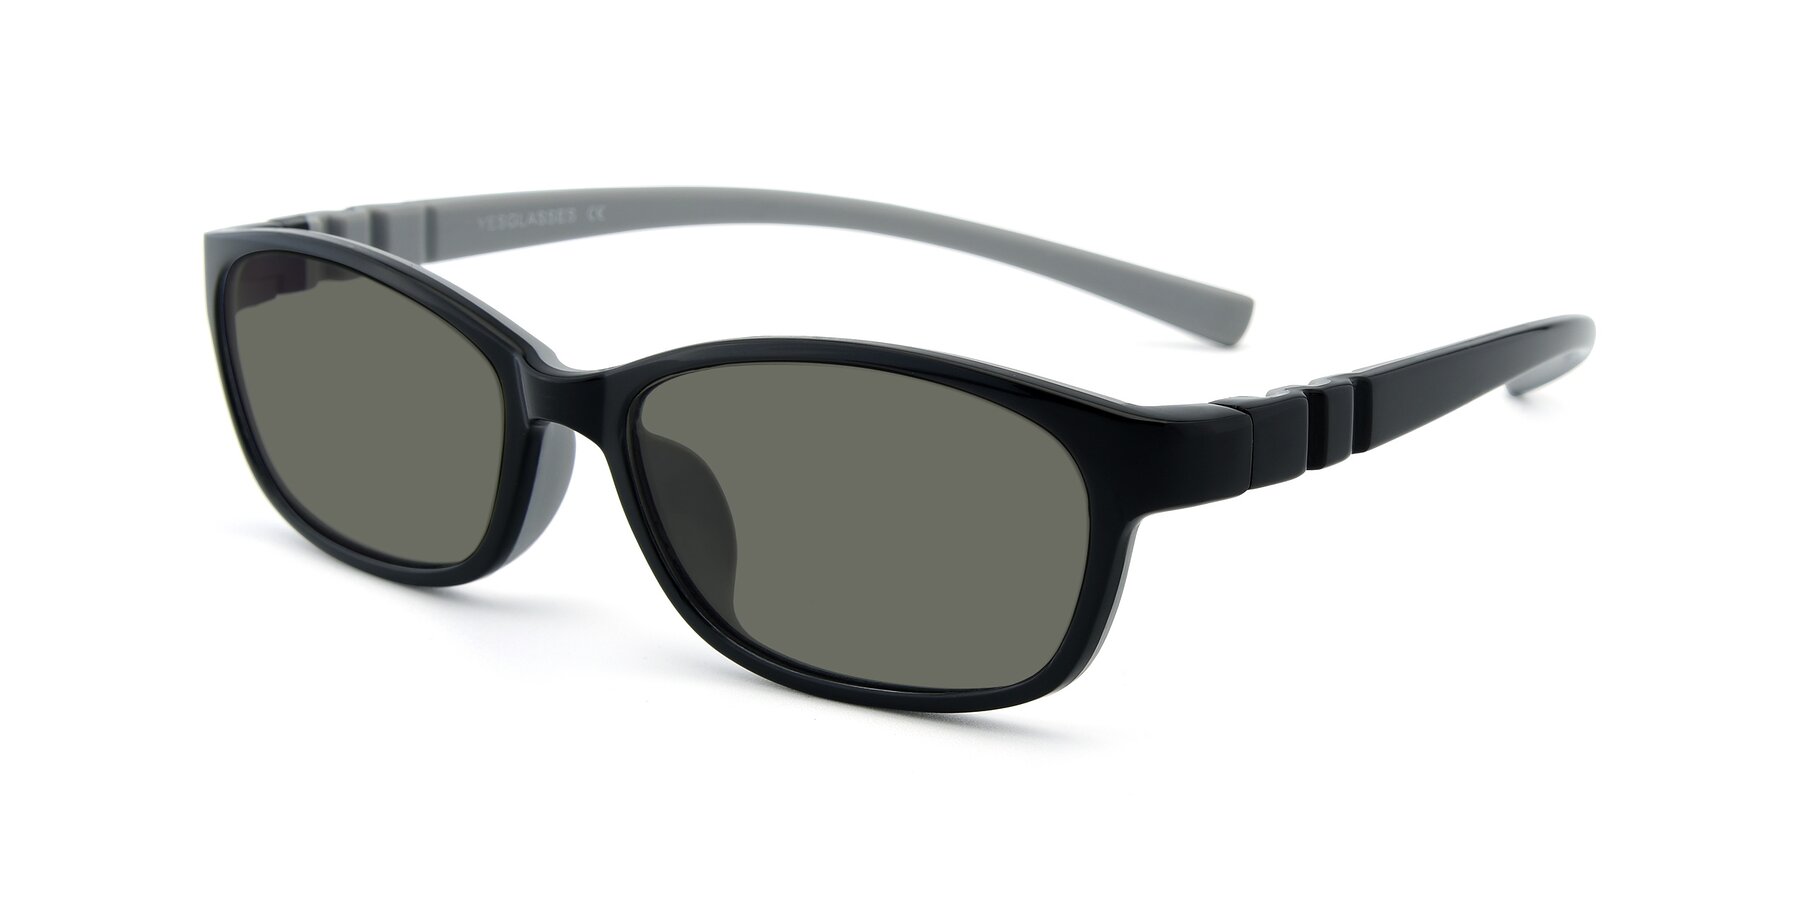 Angle of 556 in Black-Gray with Gray Polarized Lenses